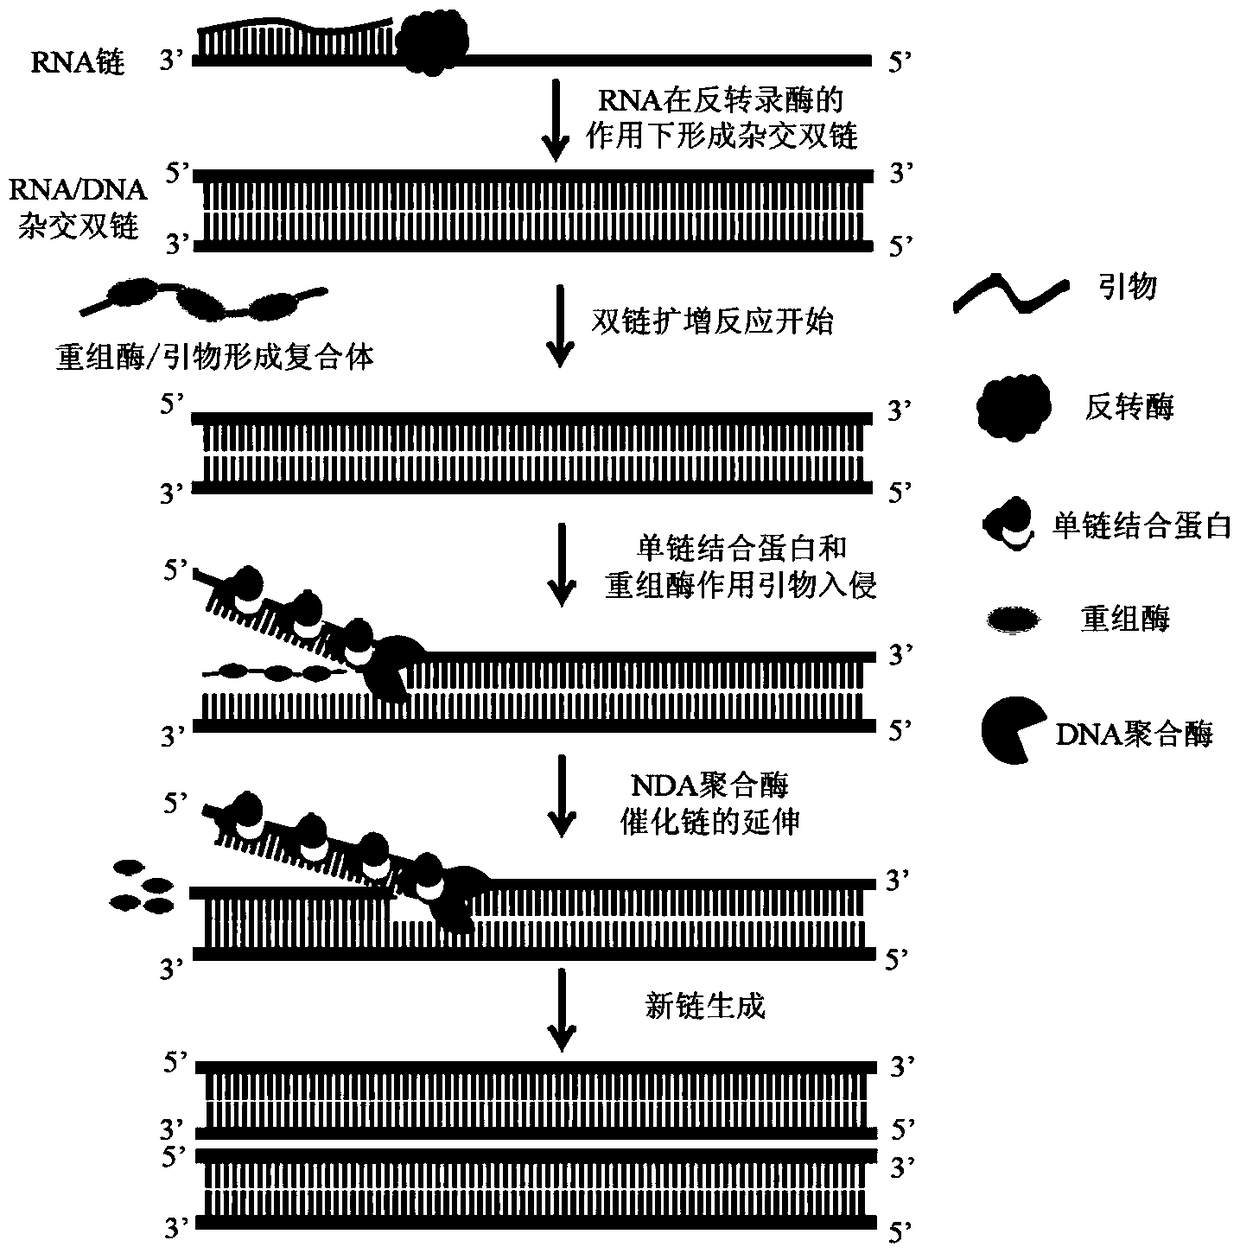 Method, reagent, primers and probes for isothermal rapid detection of Ebola virus at room temperature